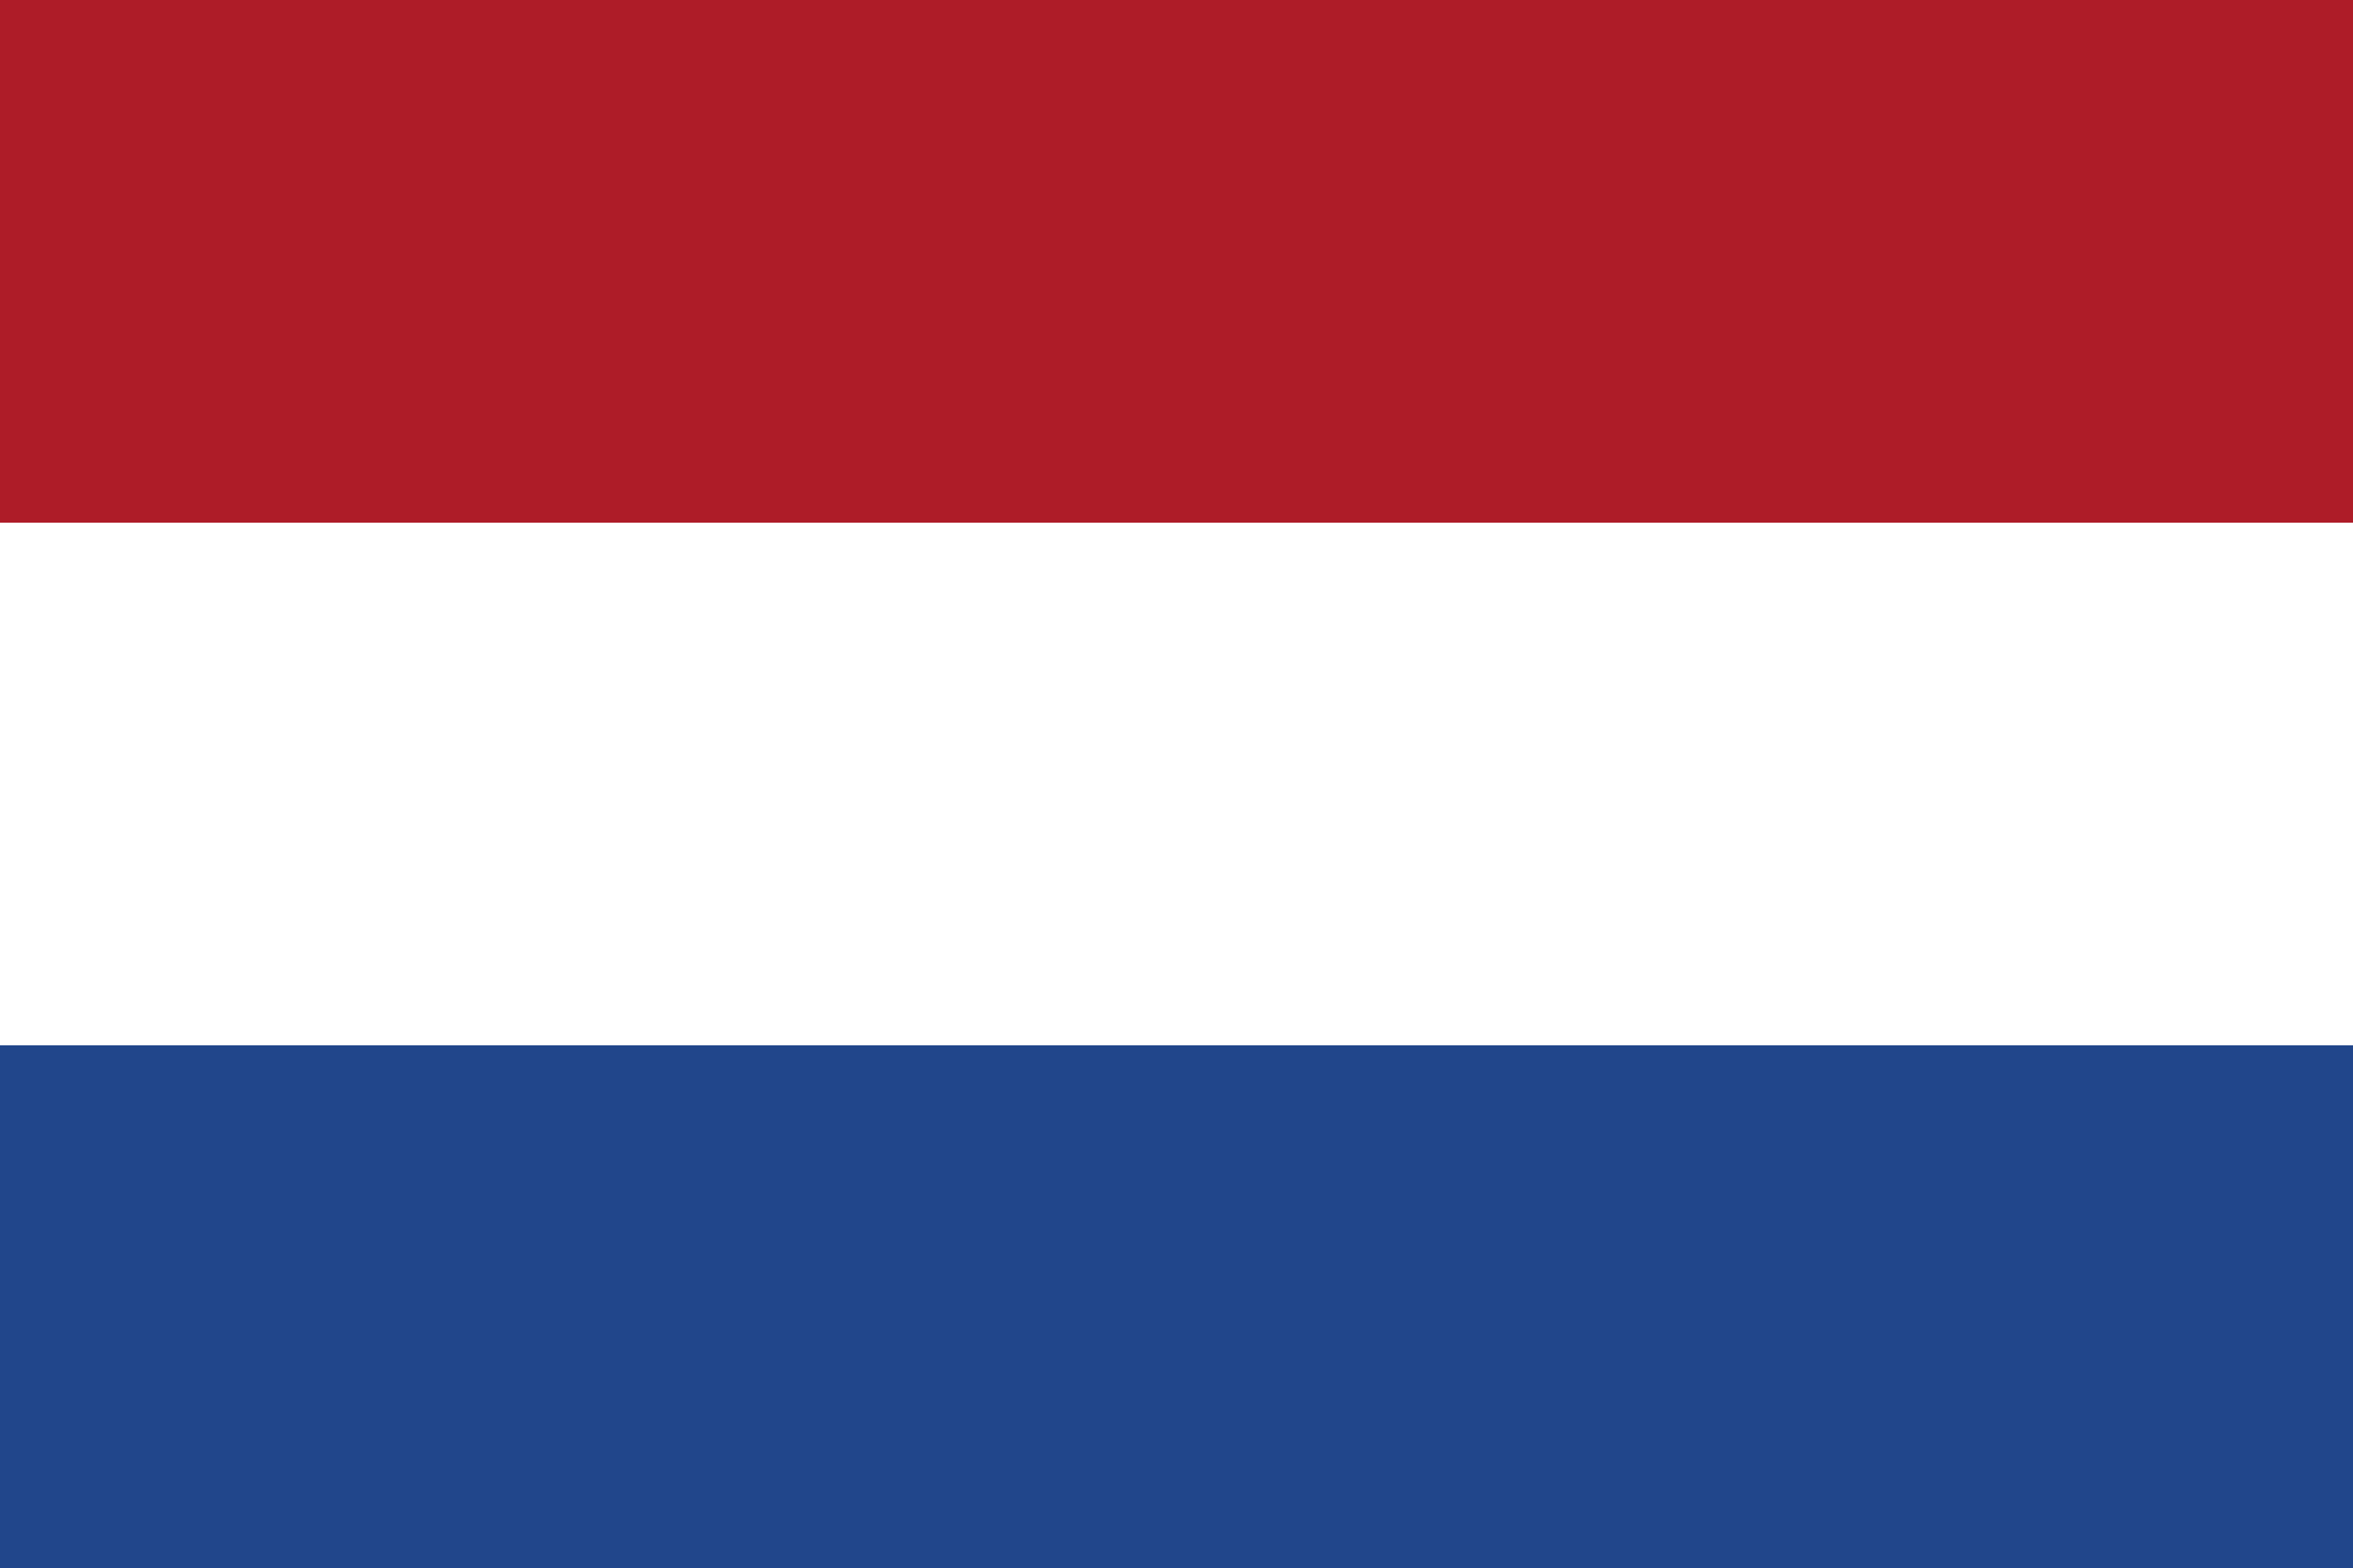 The Netherlands Flag Vector - Free Download